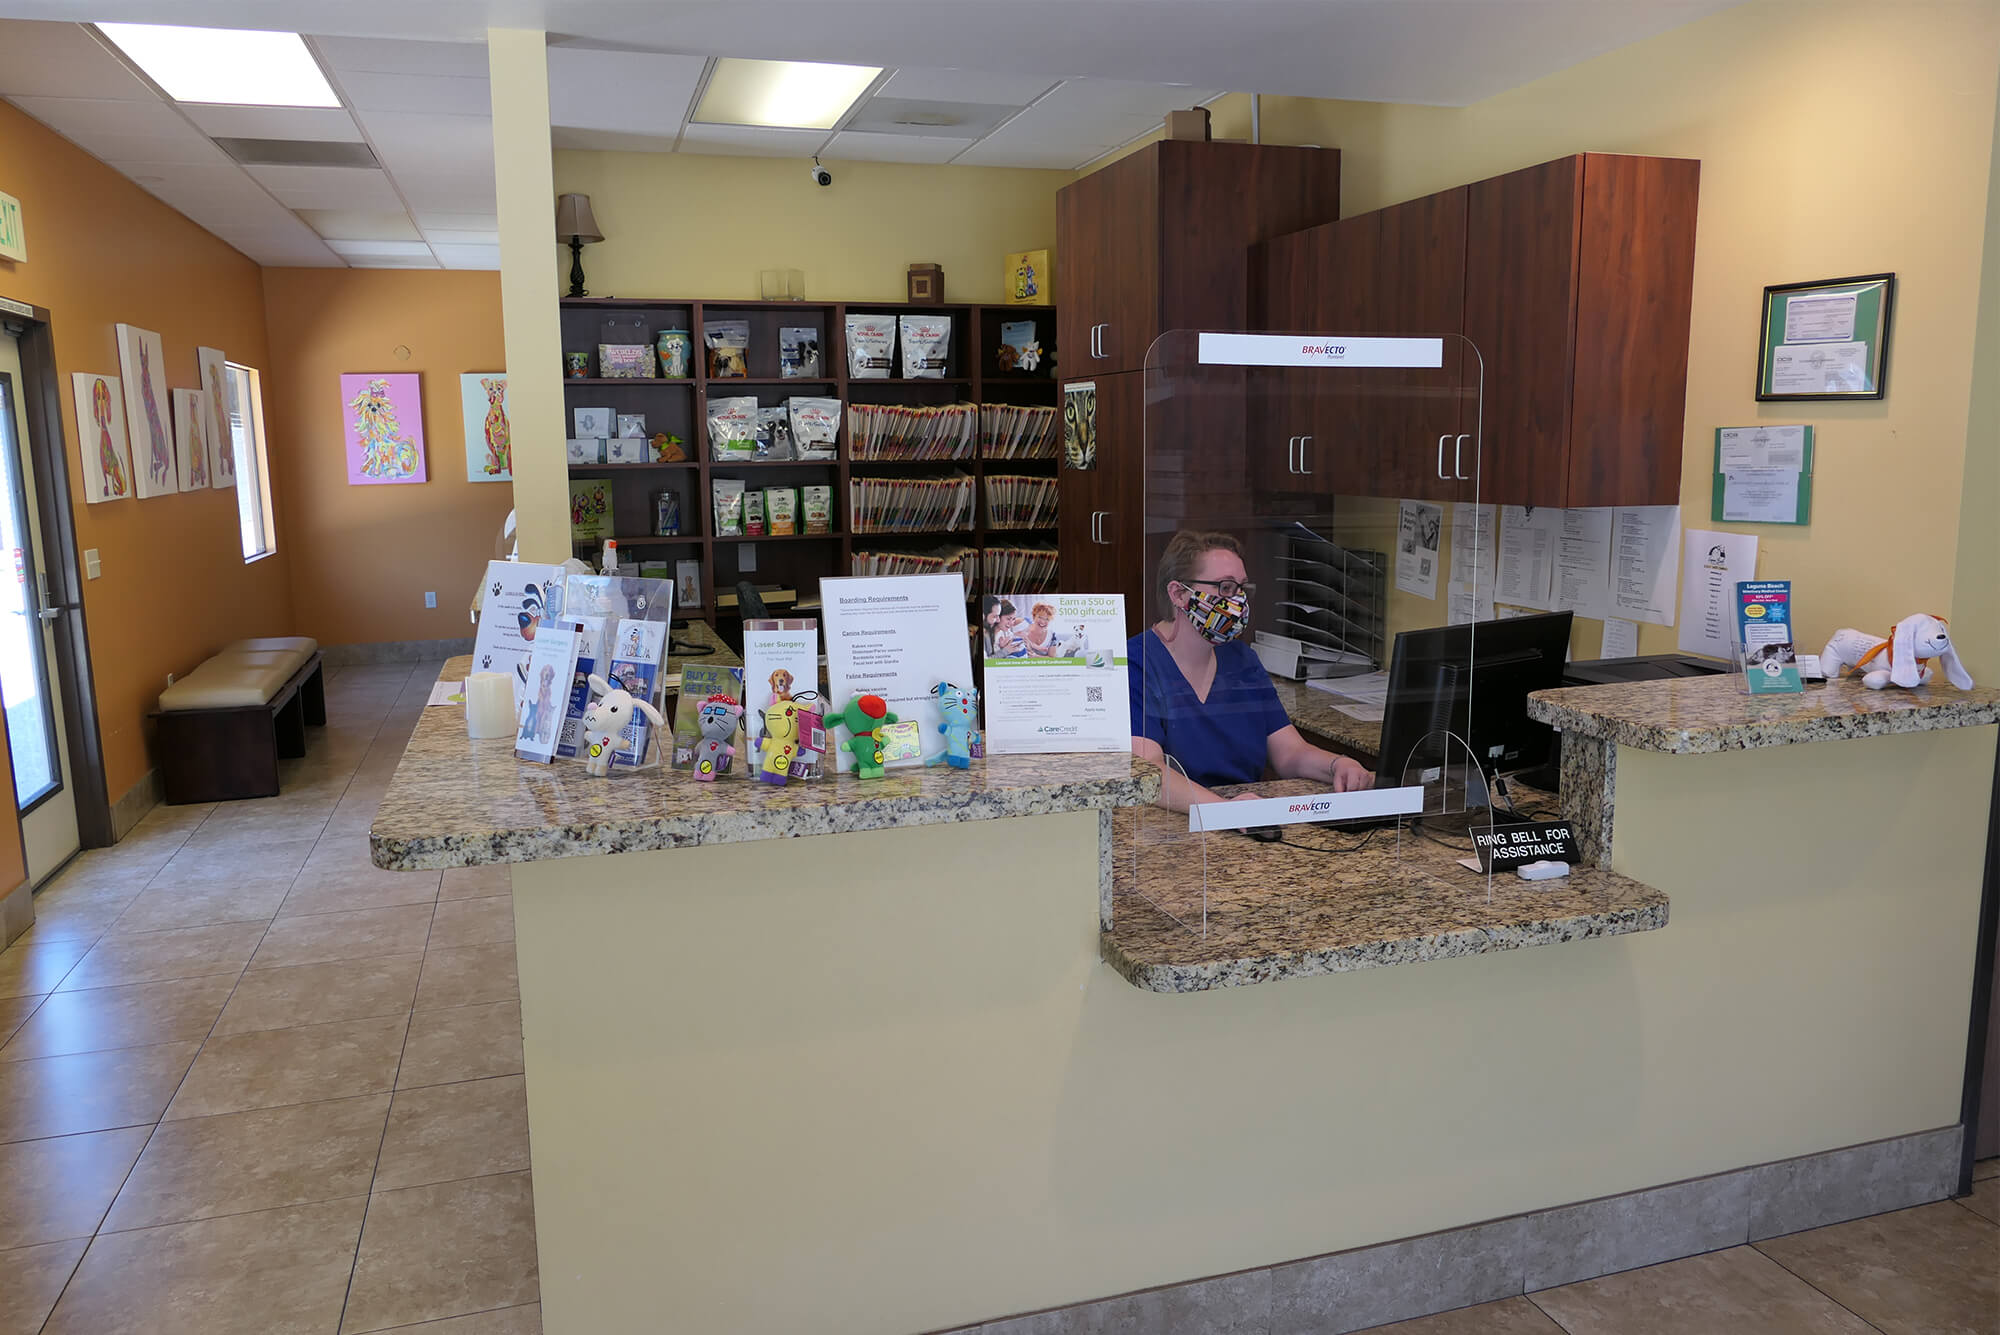 Laguna Beach Veterinary Medical Center - Pet Care for Dogs and Cats - Gallery Photos